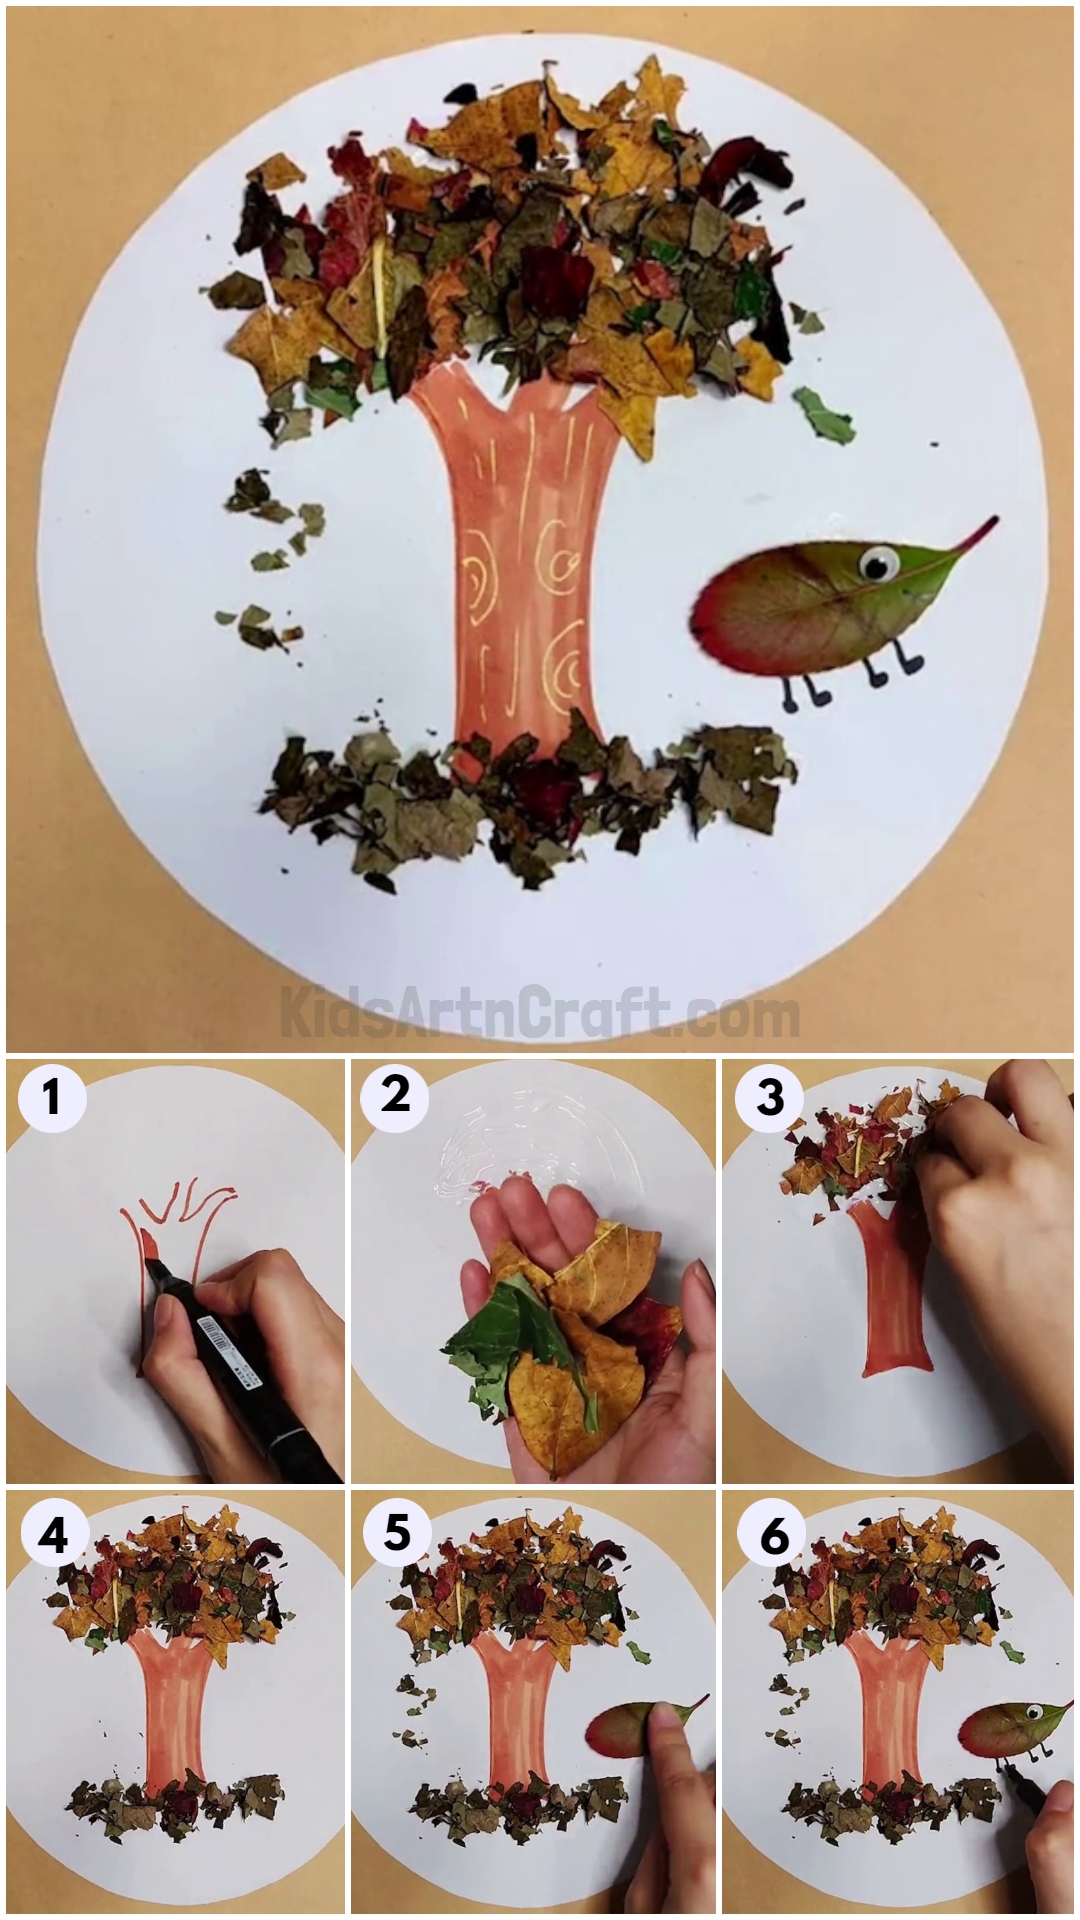 Easy Tree Craft From Fall Leaves Step-by-step Tutorial - Kids Art & Craft